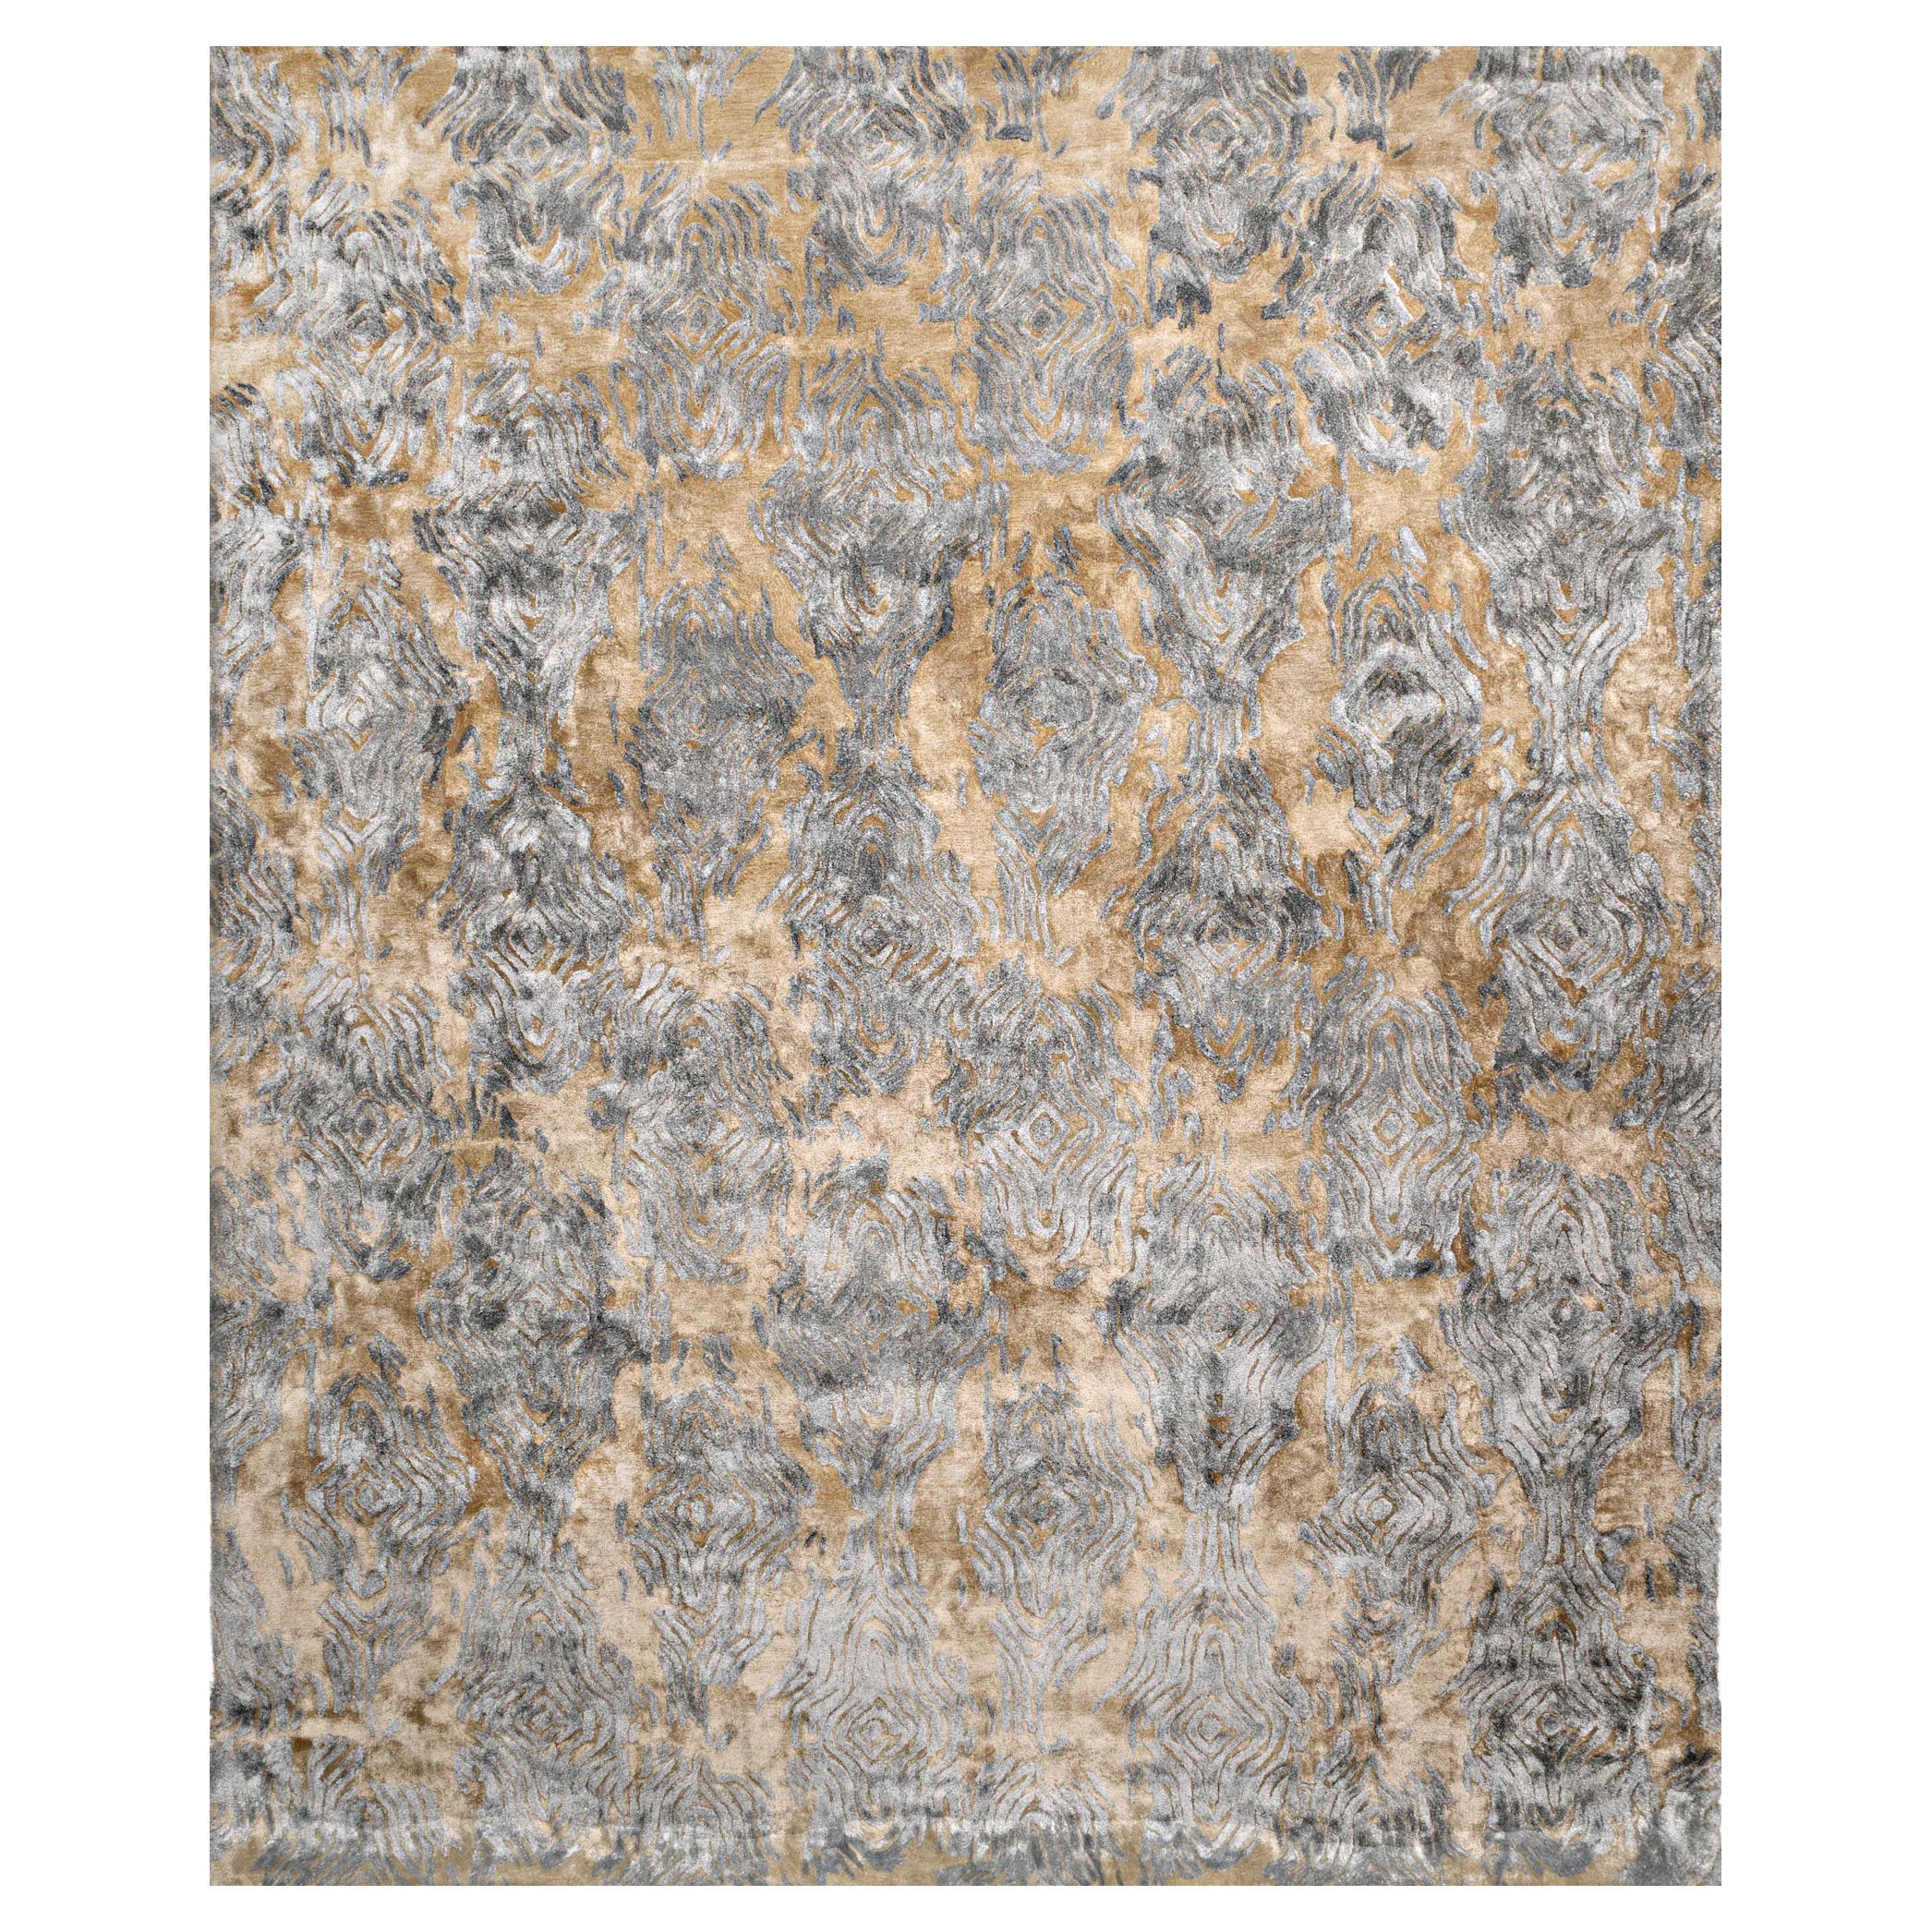 MASSIF Hand Tufted Contemporary Rug in Grey Gold and Taupe Grey Colours By Hands For Sale